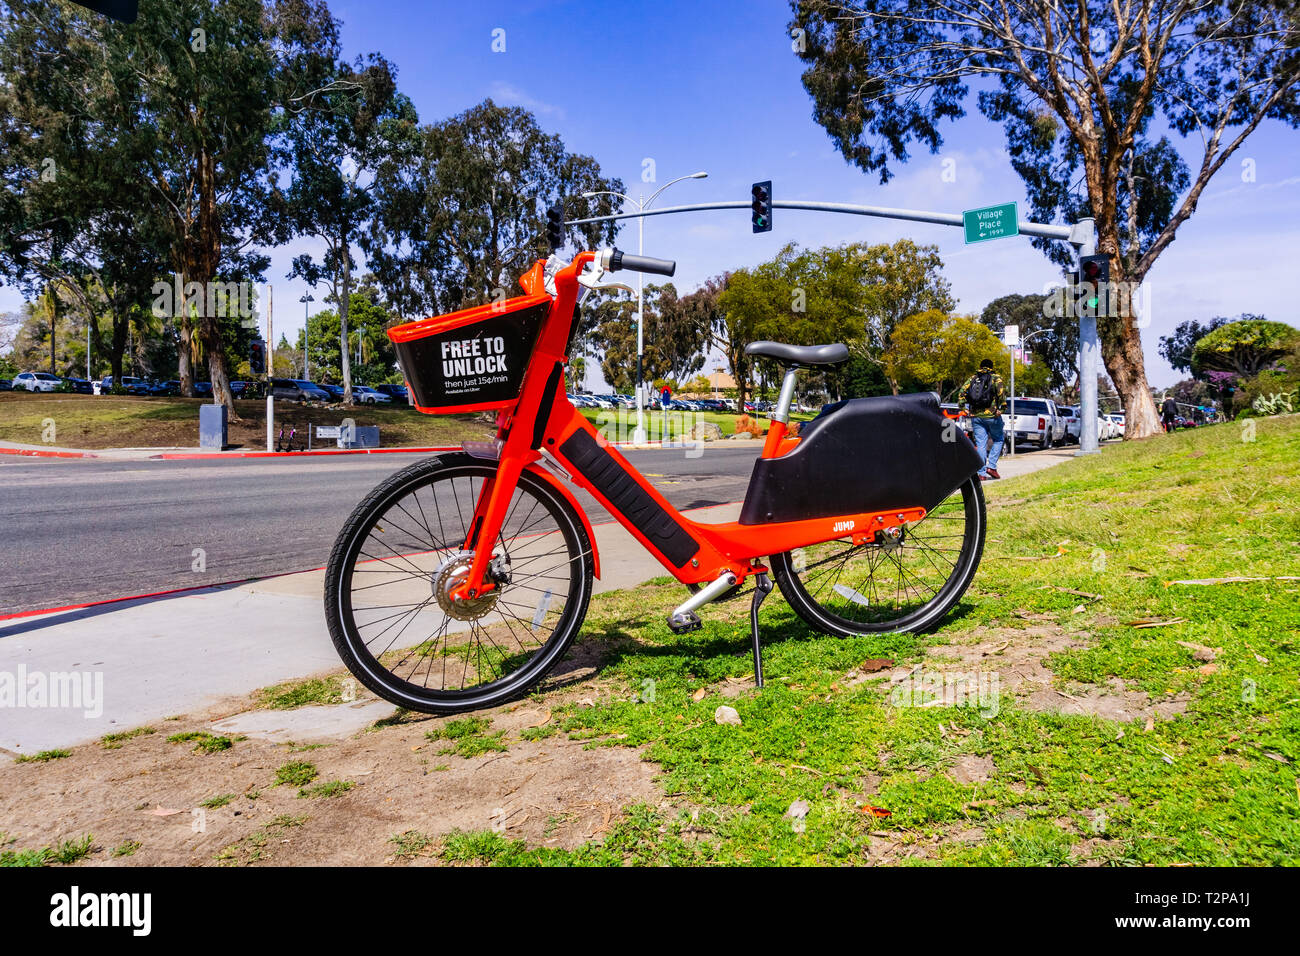 March 19, 2019 San Diego / CA / USA - Jump electric bikes parked near Balboa Park; JUMP Bikes is a dock less electric bicycle sharing system acquired  Stock Photo